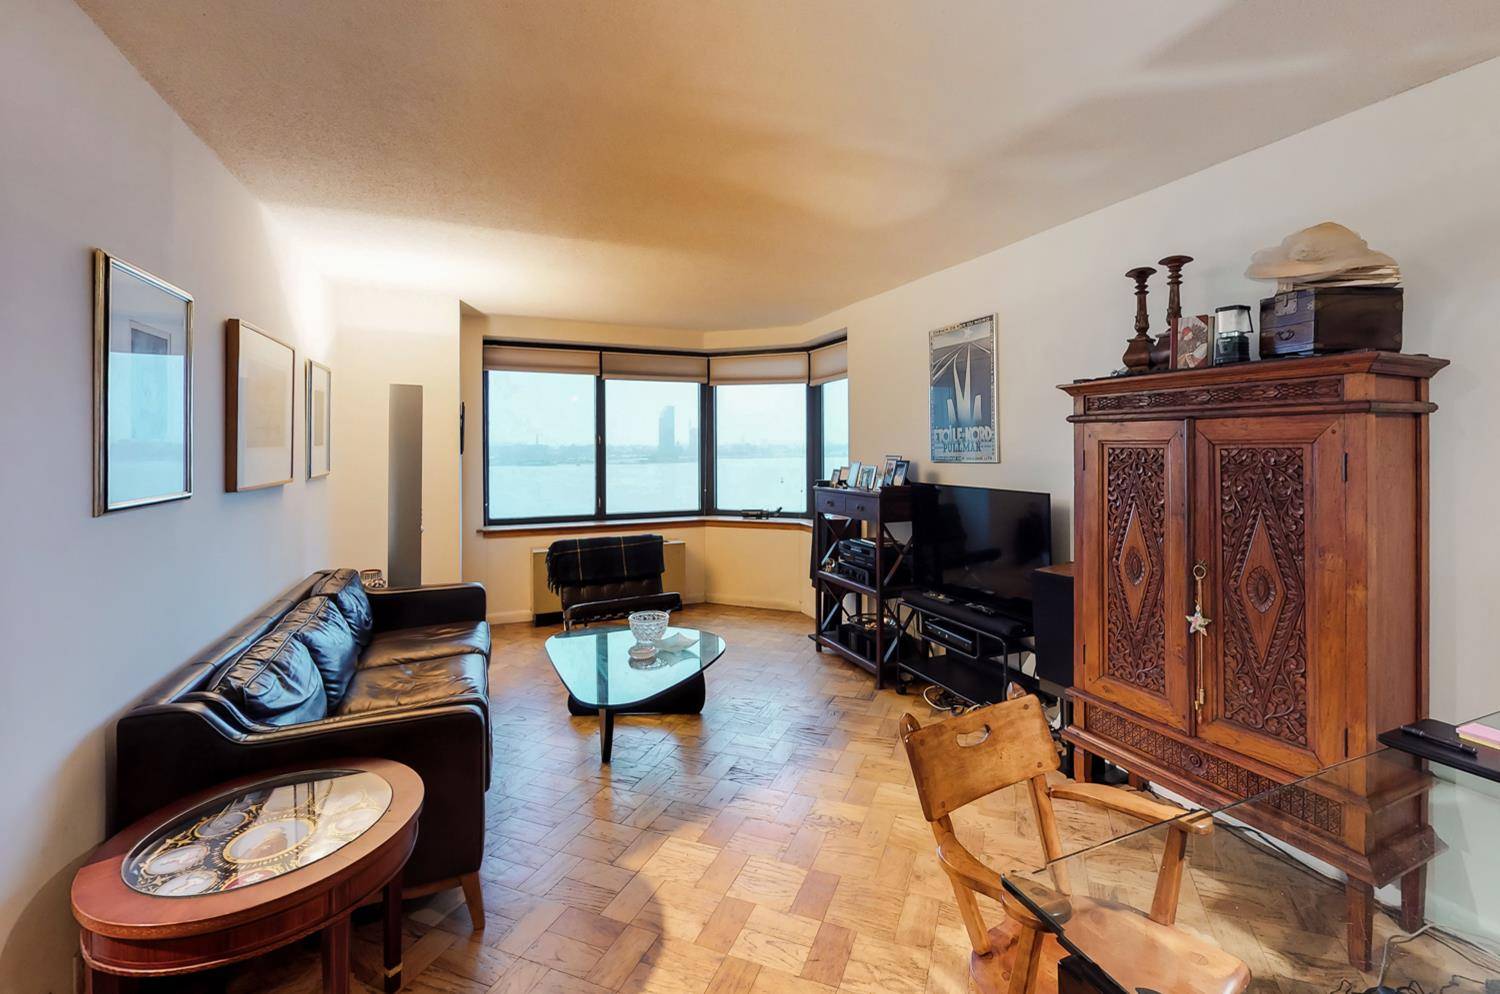 BREATHTAKING VIEWS OF THE EAST RIVER IN THIS AMENITY RICH CONDO BUILDING !